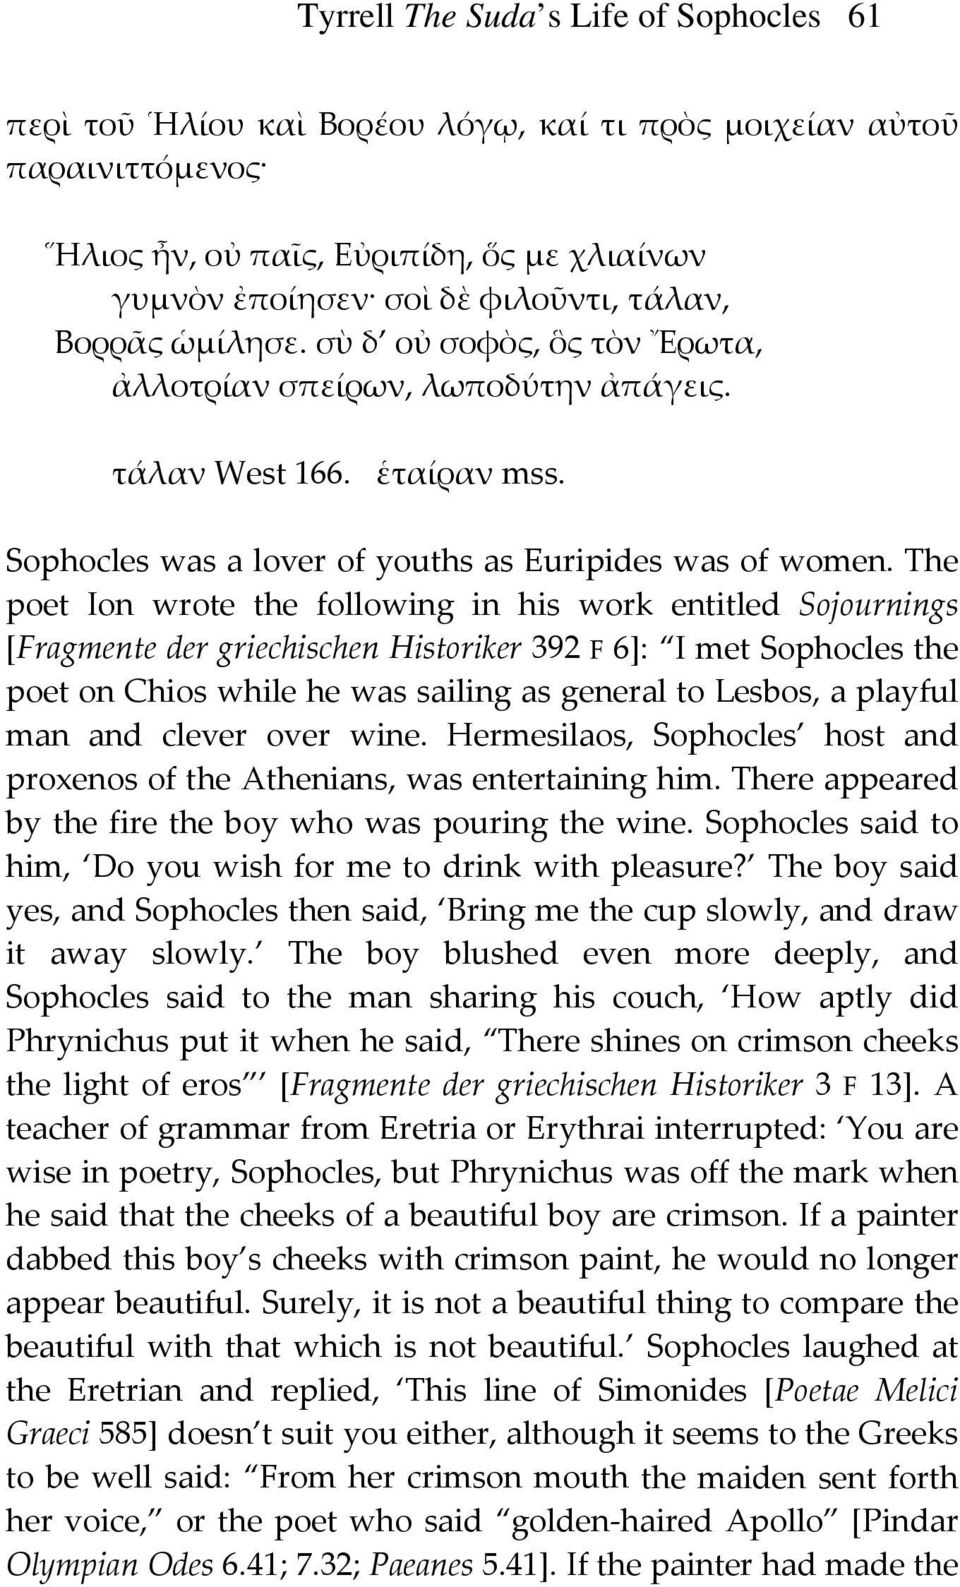 The poet Ion wrote the following in his work entitled Sojournings [Fragmente der griechischen Historiker 392 F 6]: I met Sophocles the poet on Chios while he was sailing as general to Lesbos, a